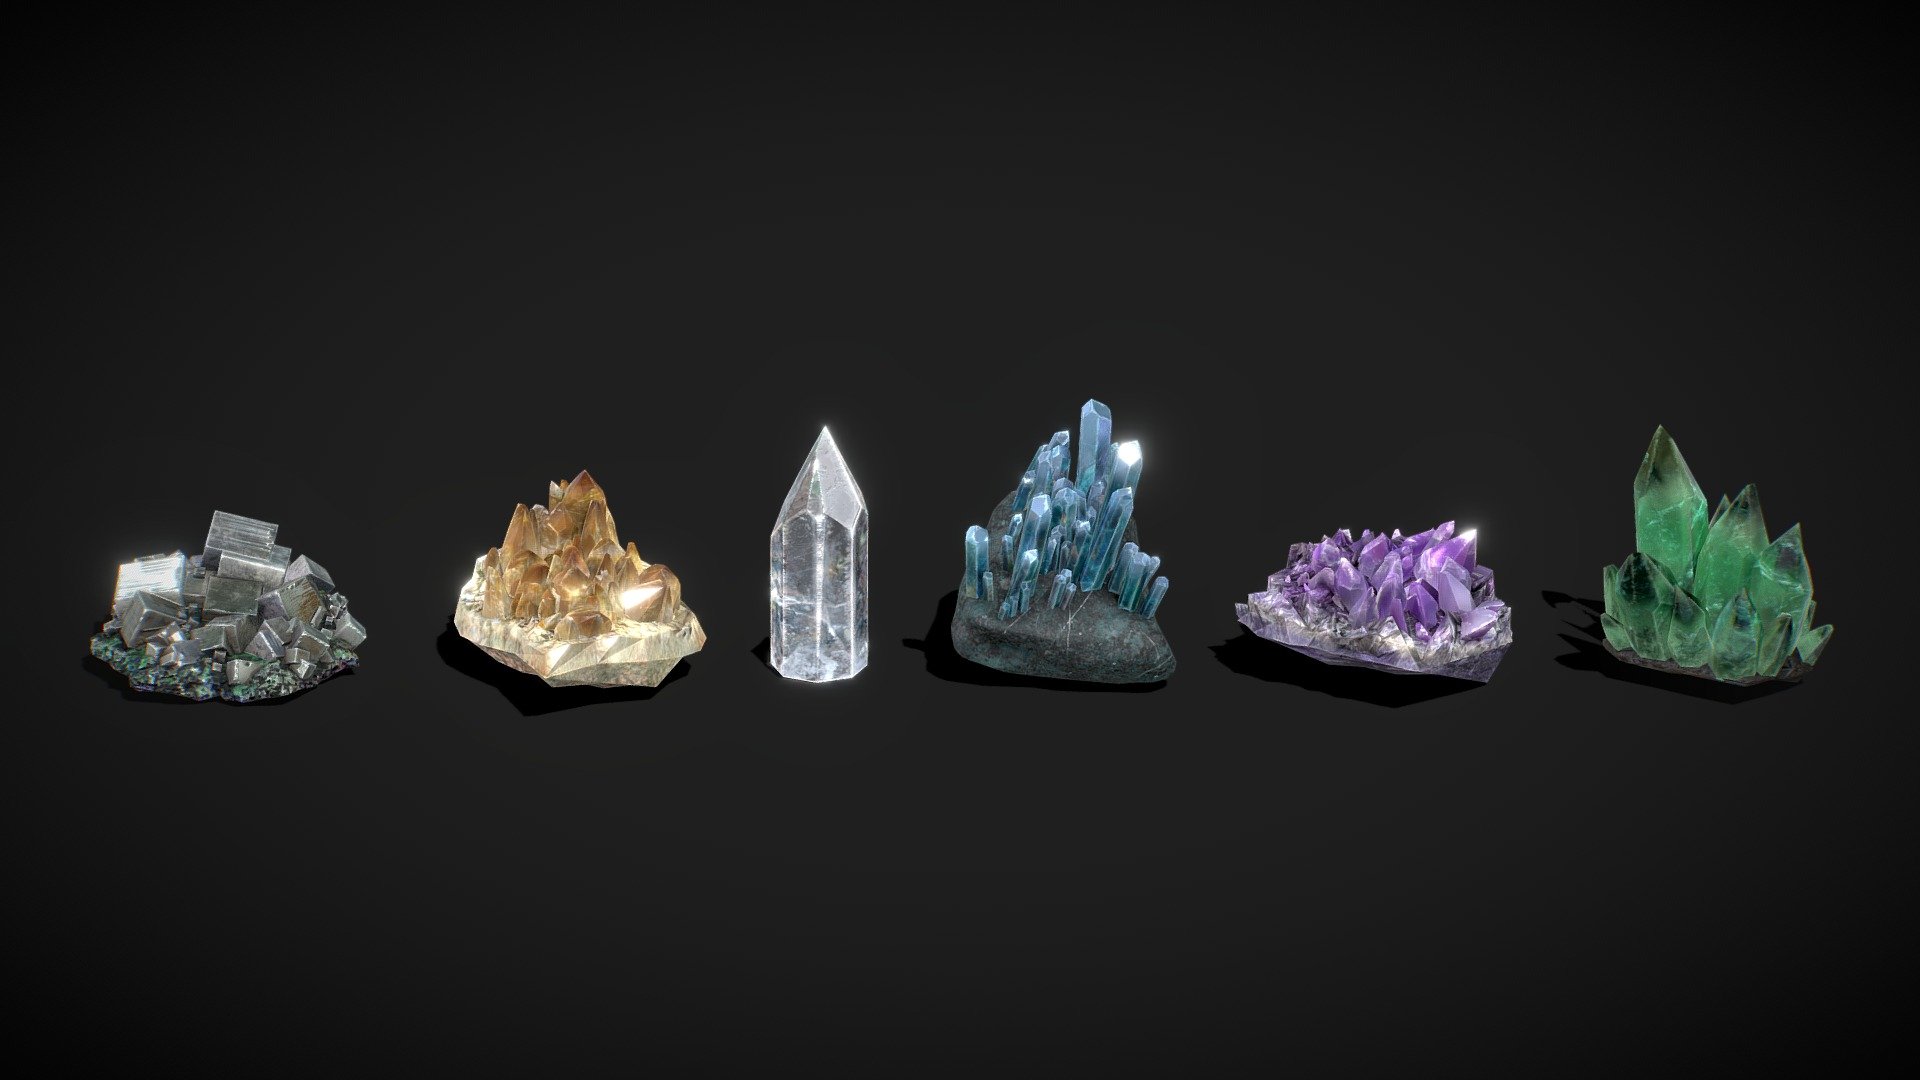 Minerals Low Poly pack

Triangles: 13.2k
Vertices: 7.6k

Pack includes:


Pyrite Crystal
Citrine Quartz Cristal
Crystal / Clear Quartz 
Blue Crystals / Quartz
Cristal Amethyst
Green Crystal / Ghost quartz

4096x4096 PNG texture

Minerals Collection &lt;&lt; - Crystals / Quartz Minerals Low Poly pack - Buy Royalty Free 3D model by Karolina Renkiewicz (@KarolinaRenkiewicz) 3d model